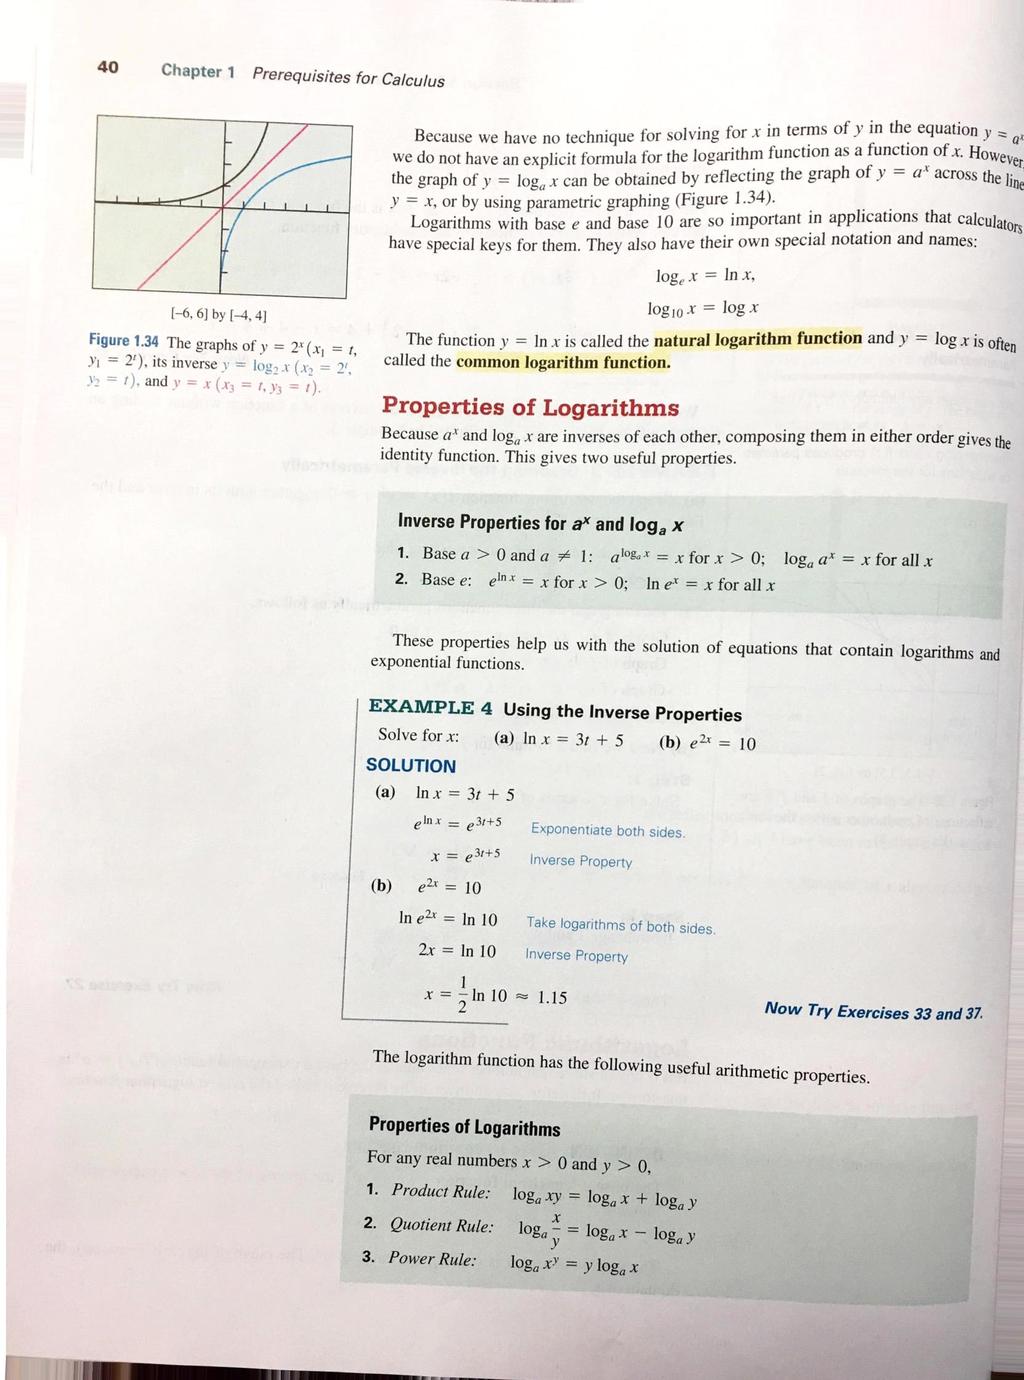 40 Chapter Prerequisites for Calculus Because we have no technique for solving for in terms of y in the equation y, we do not have an eplicit formula for the logarithm function as a function of.